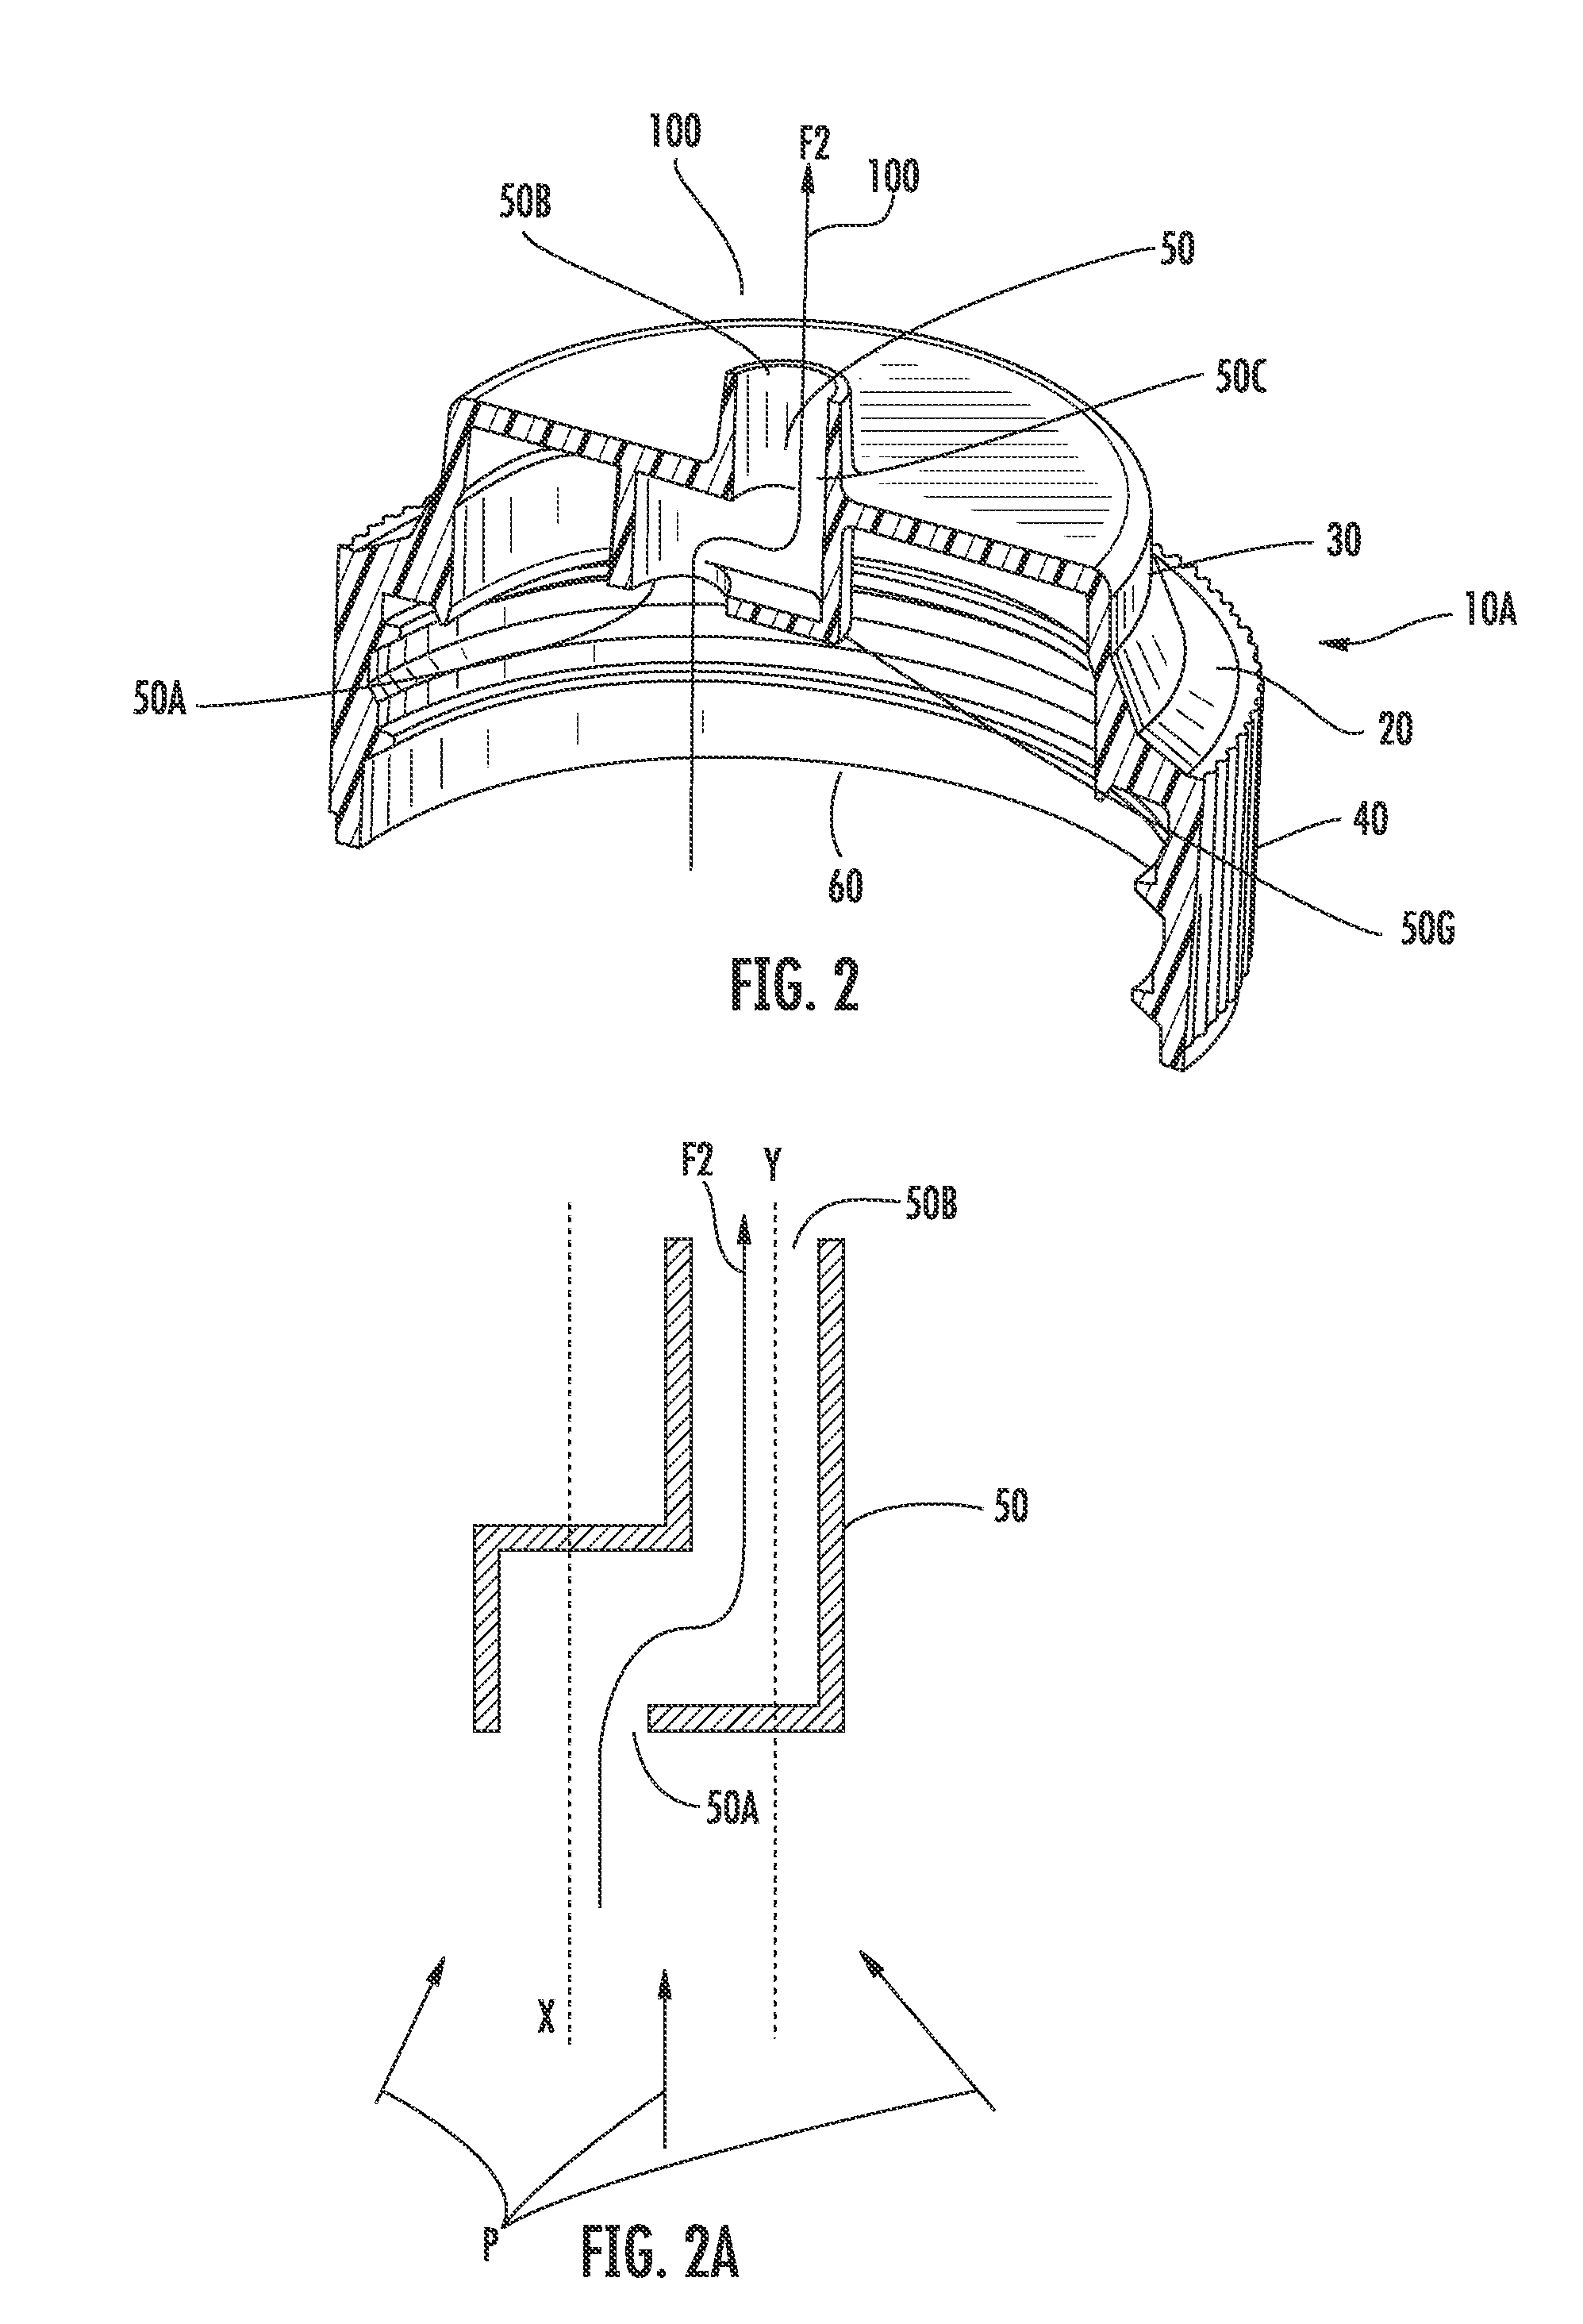 Dispensing closure with obstructed, offset, non-linear flow profile